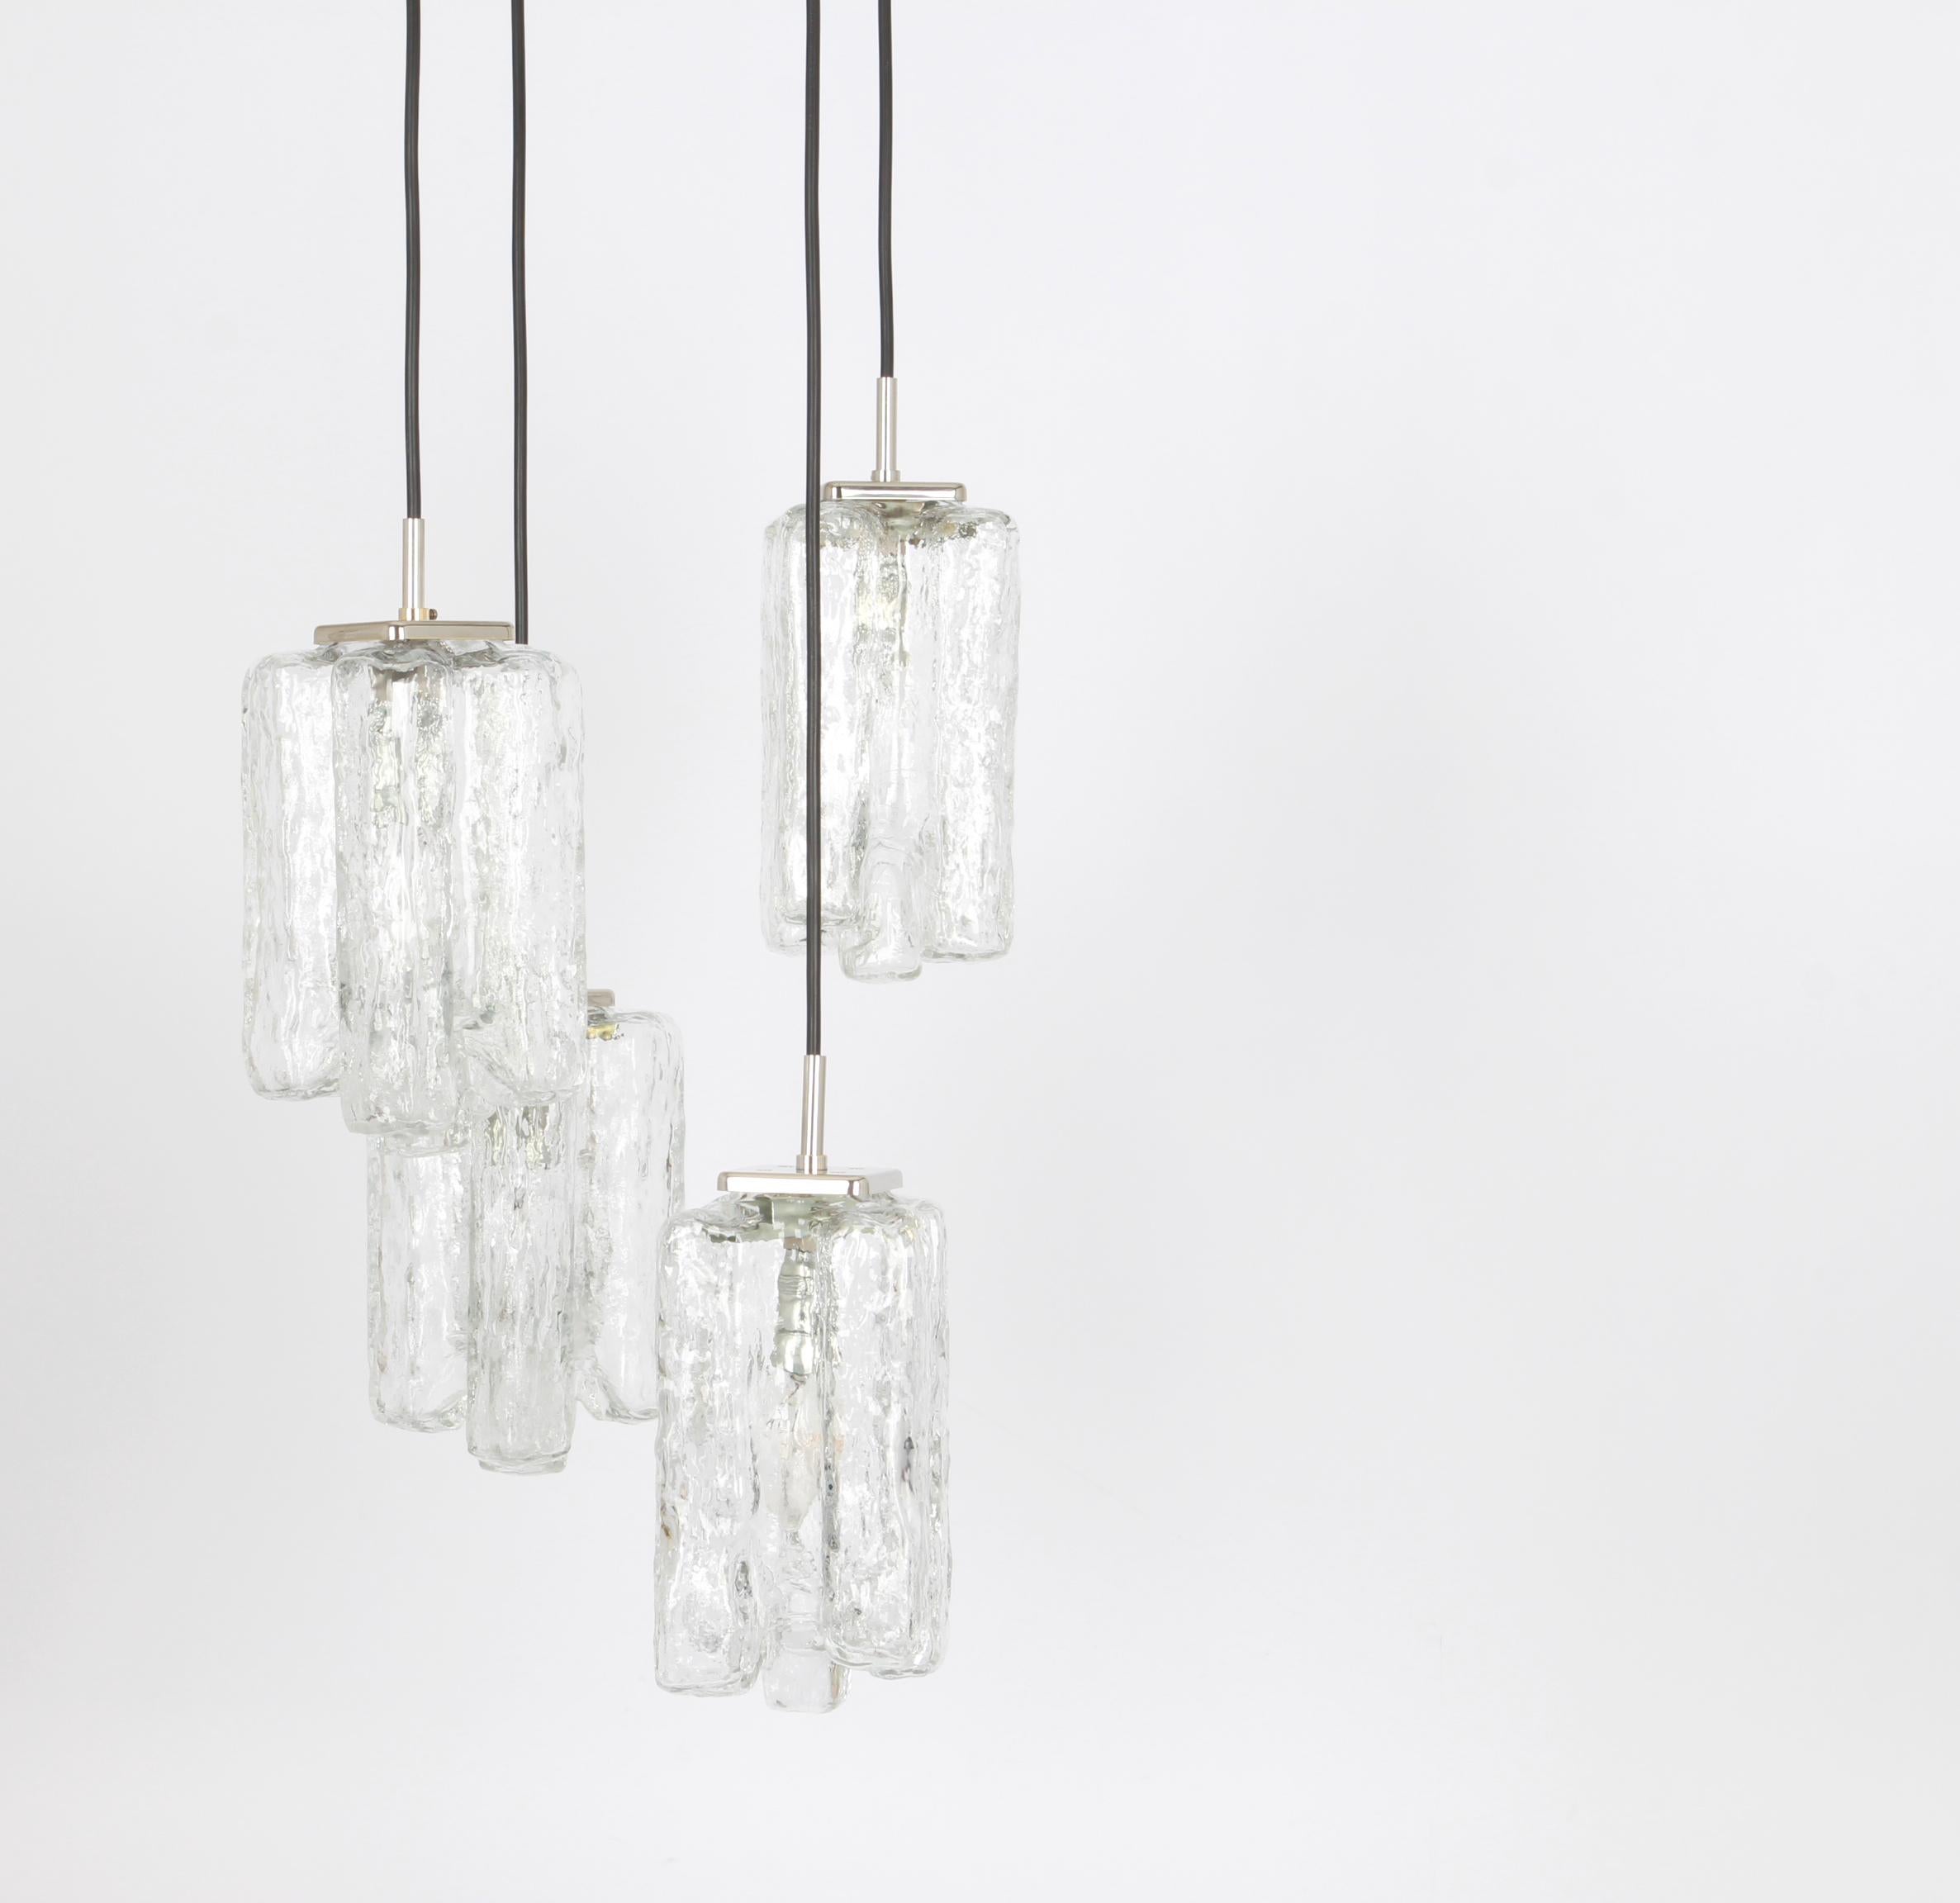 A special cascading chandelier designed by Kalmar, manufactured in Austria, circa 1970s with 4 textured Murano glasses.
stunning light effect.
Sockets: 4 x E14 small bulb. (each 40 W max).
Light bulbs are not included. It is possible to install